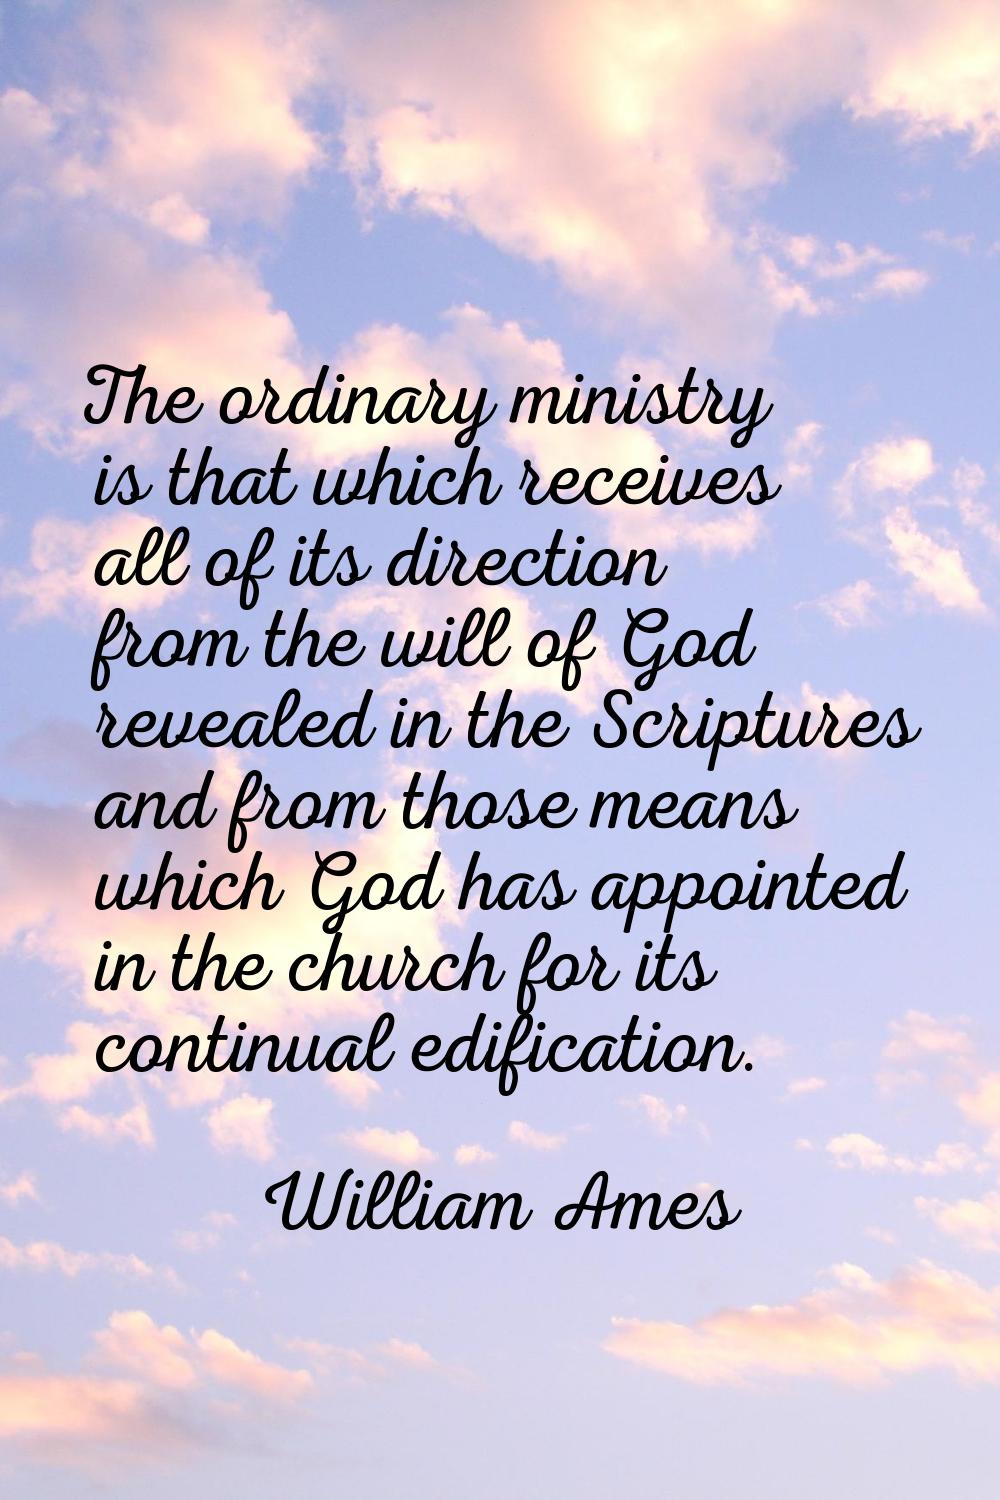 The ordinary ministry is that which receives all of its direction from the will of God revealed in 